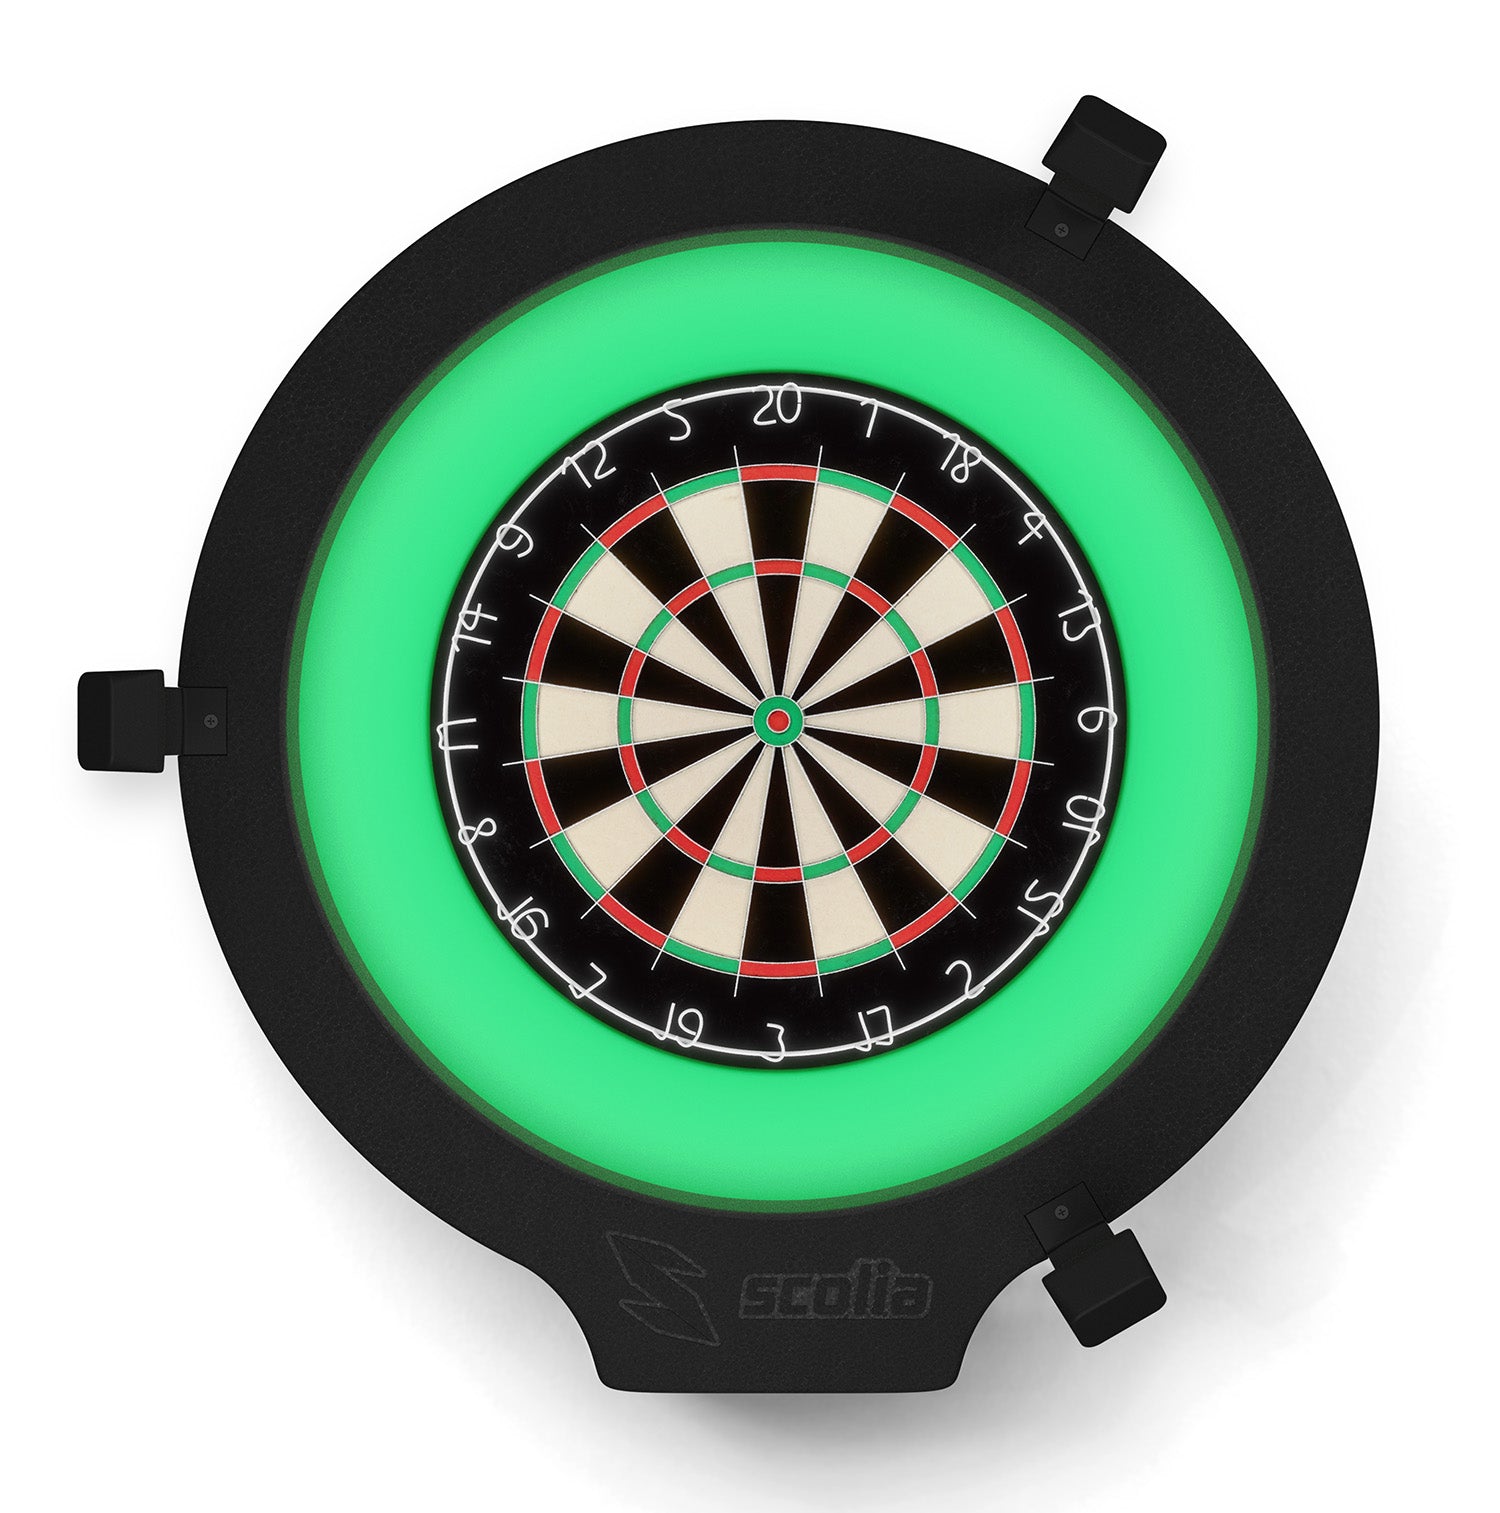 I Spent $1000 On A Self Counting Dartboard Surround! - Scolia Home